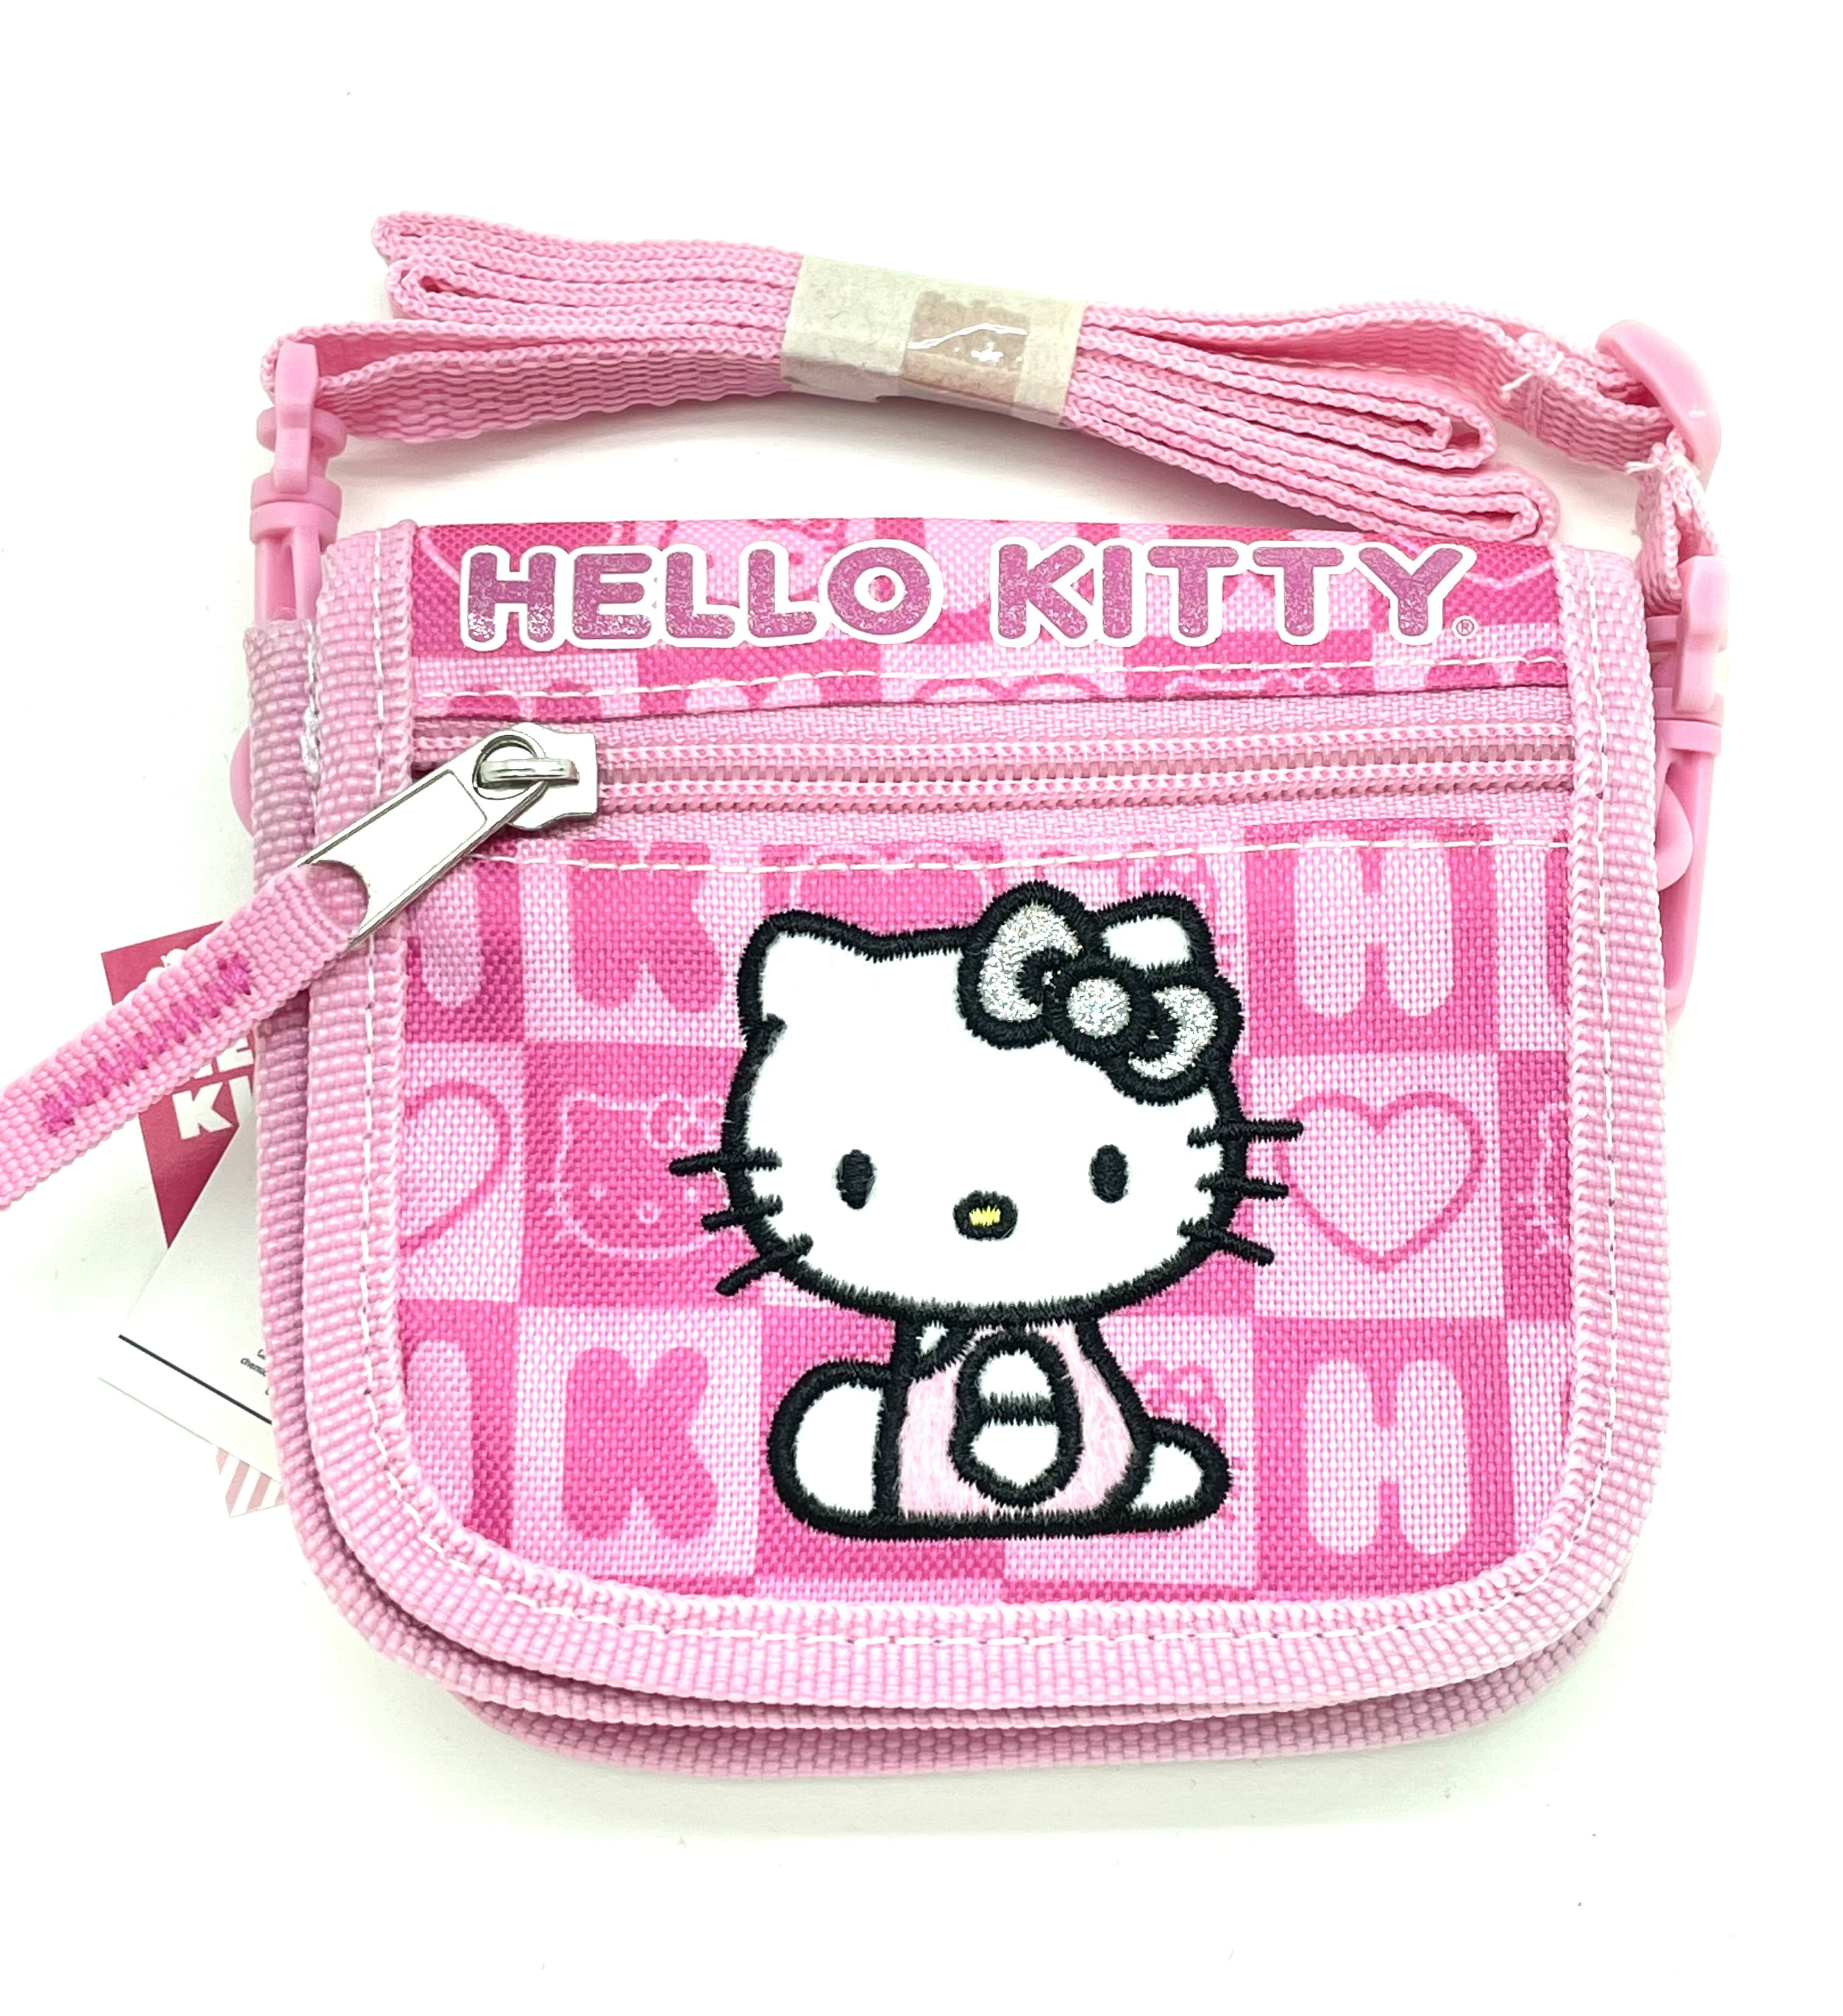 Convenient Padded Pouch has Adjustable/Removable Strap Sanrio Hello Kitty 